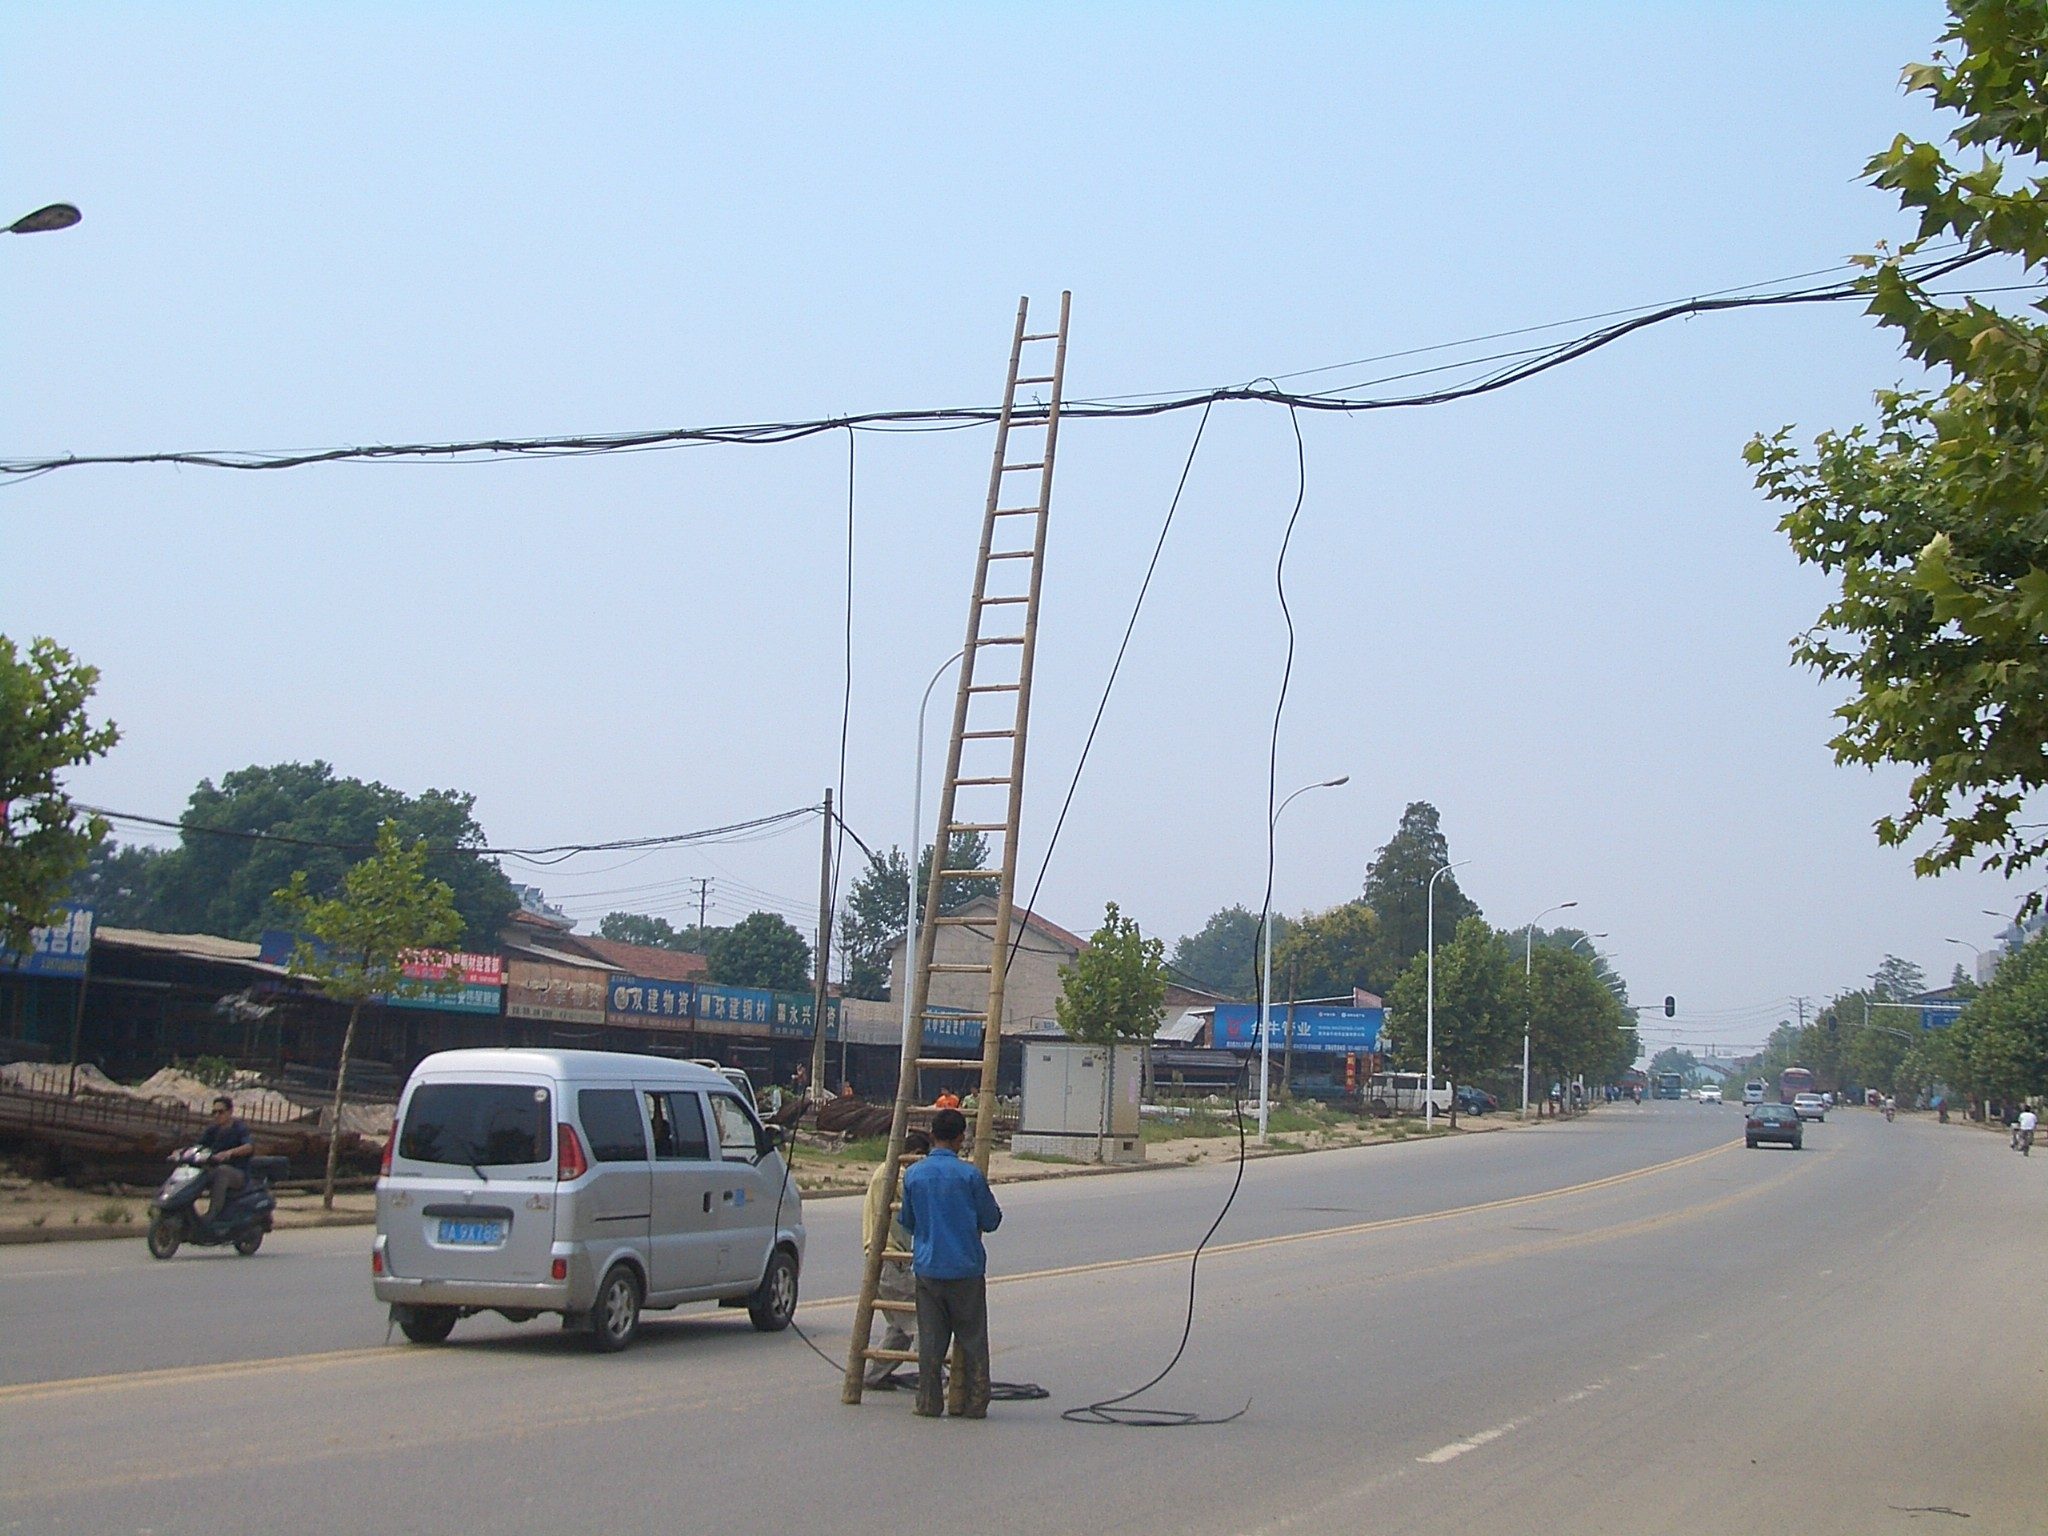 Don't set the ladder too close to electrical lines